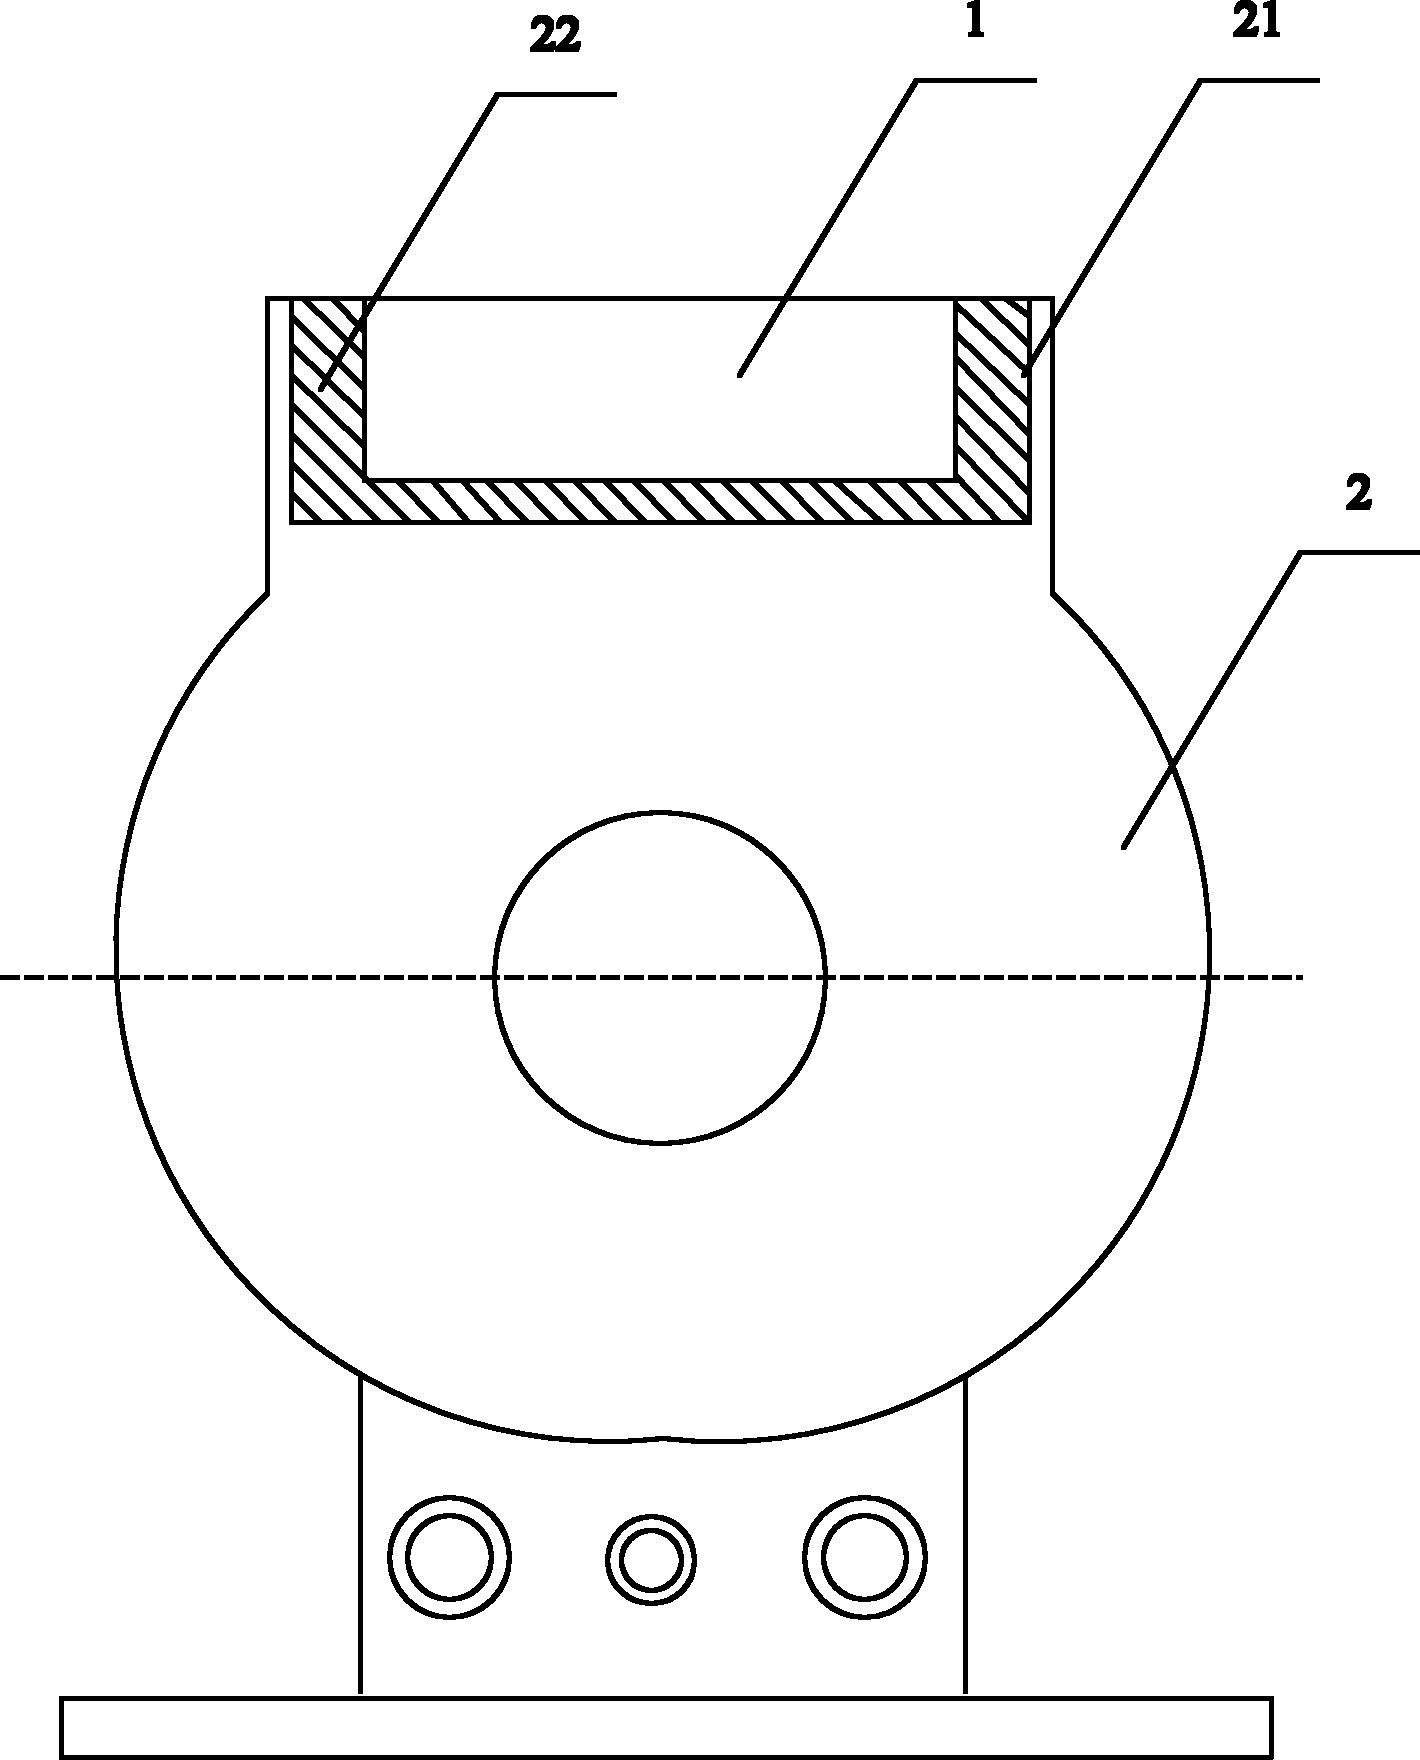 Mutual inductor device